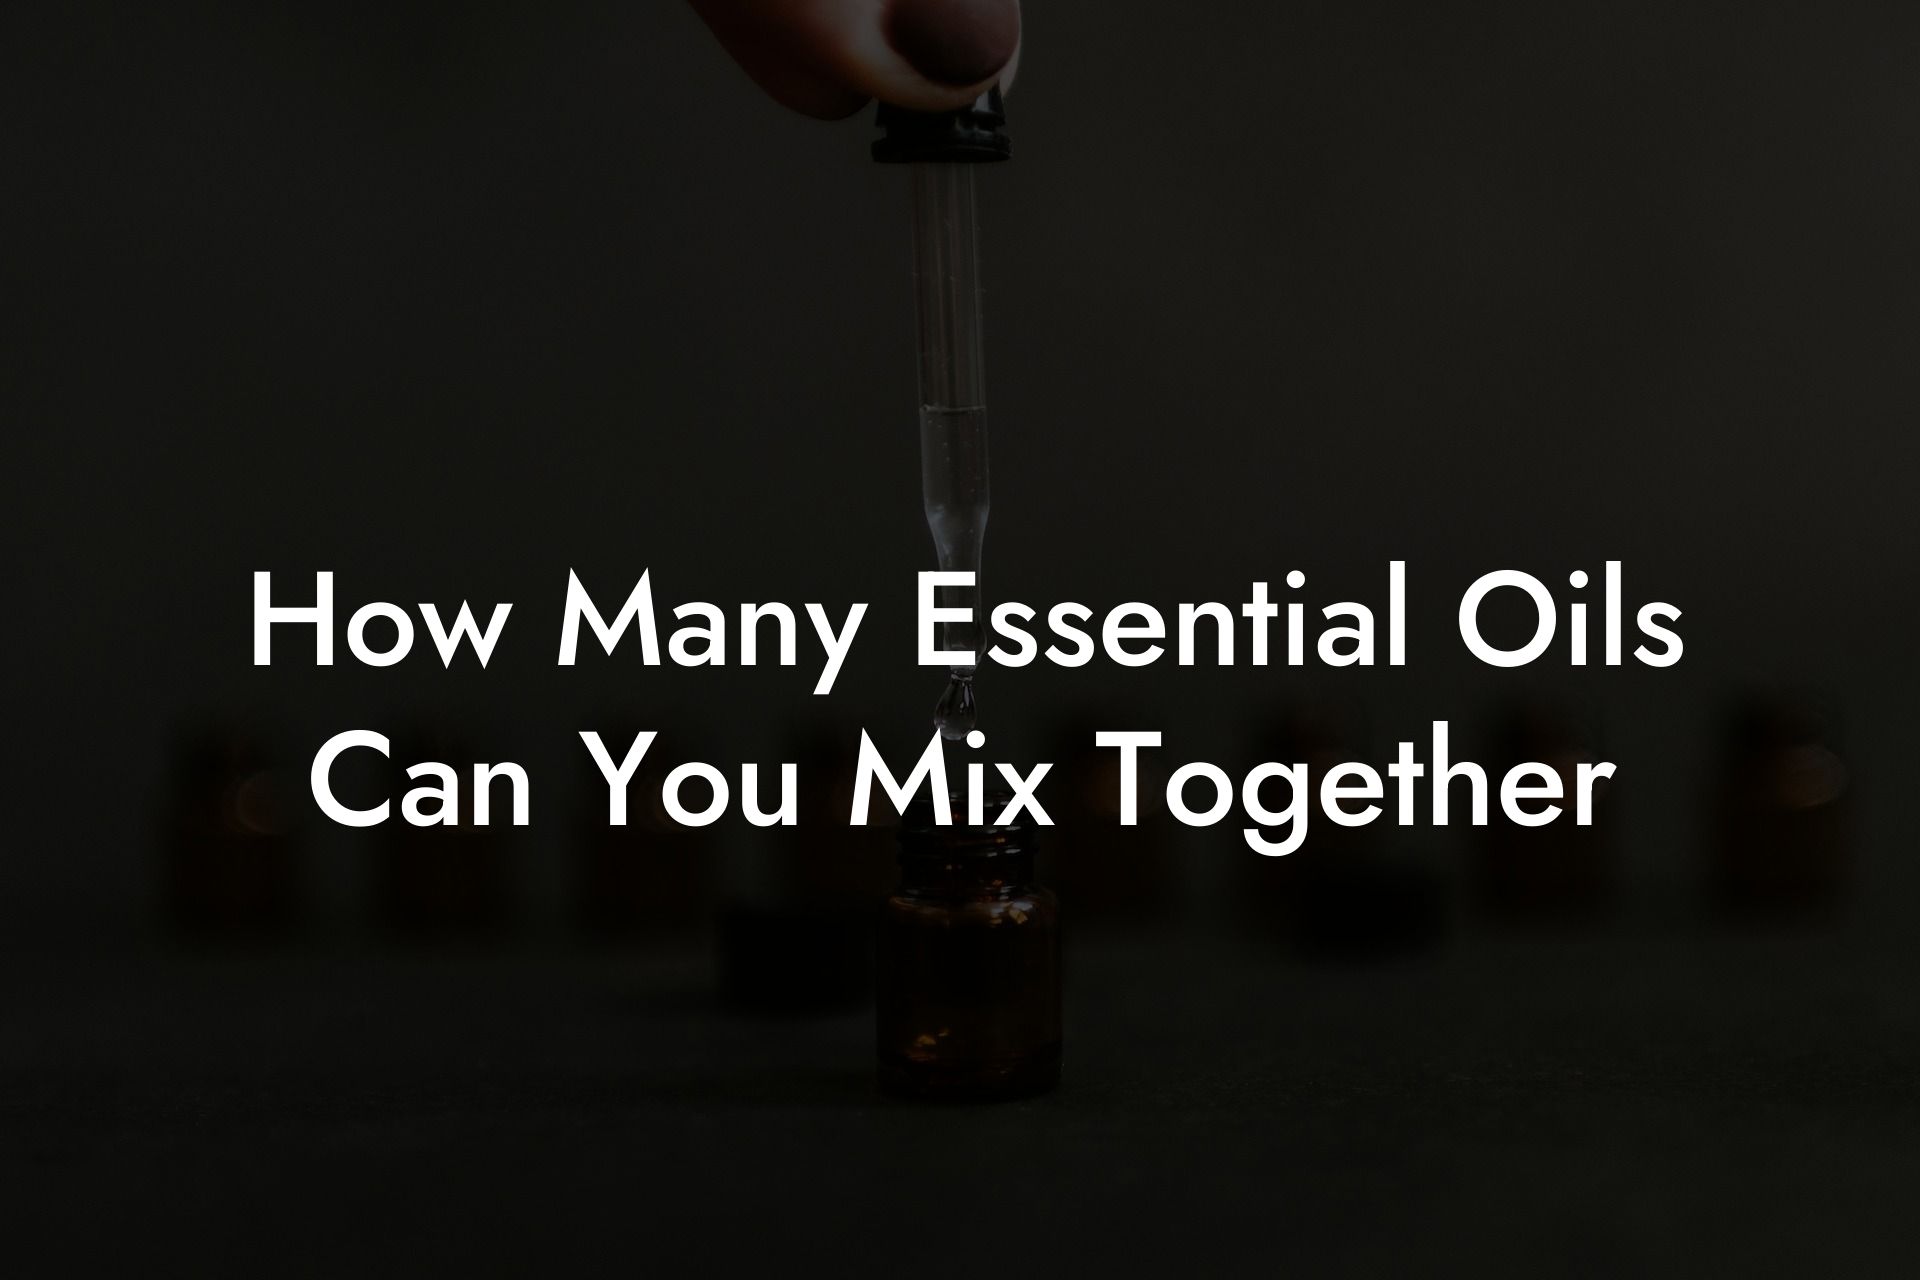 How Many Essential Oils Can You Mix Together